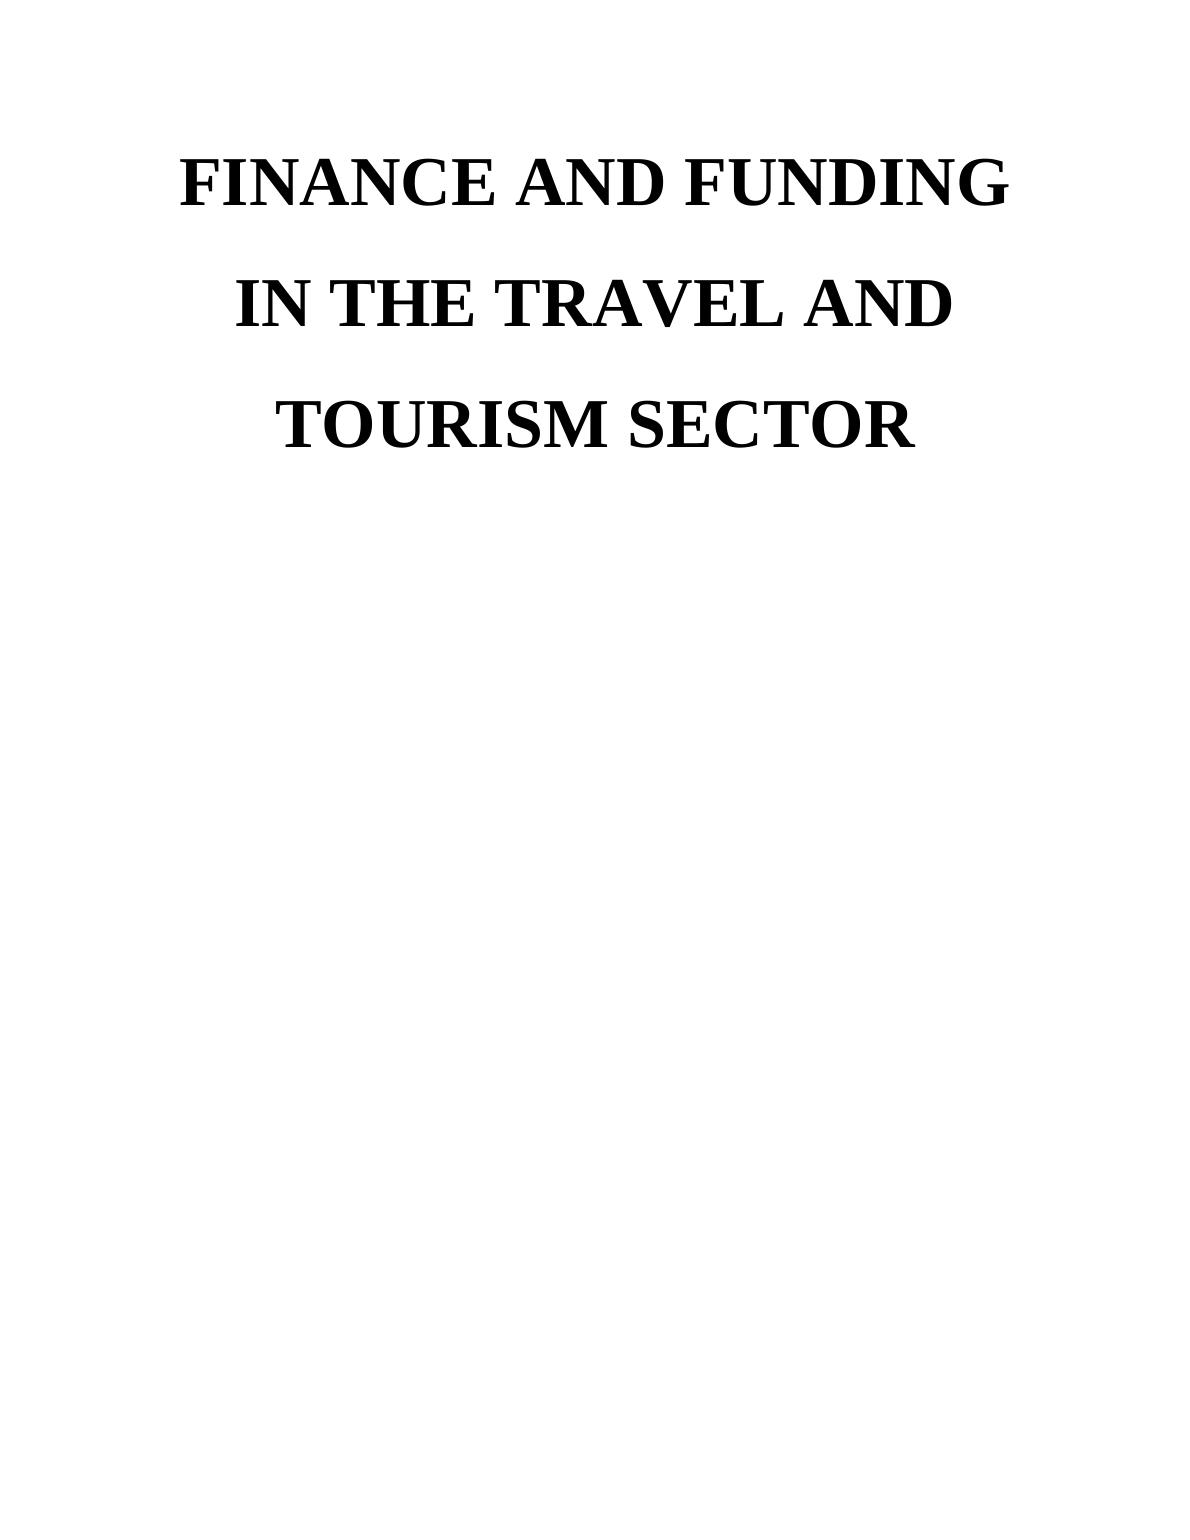 Finance and Funding in the Travel and Tourism Sector Assignment - Carnival Corporation_1